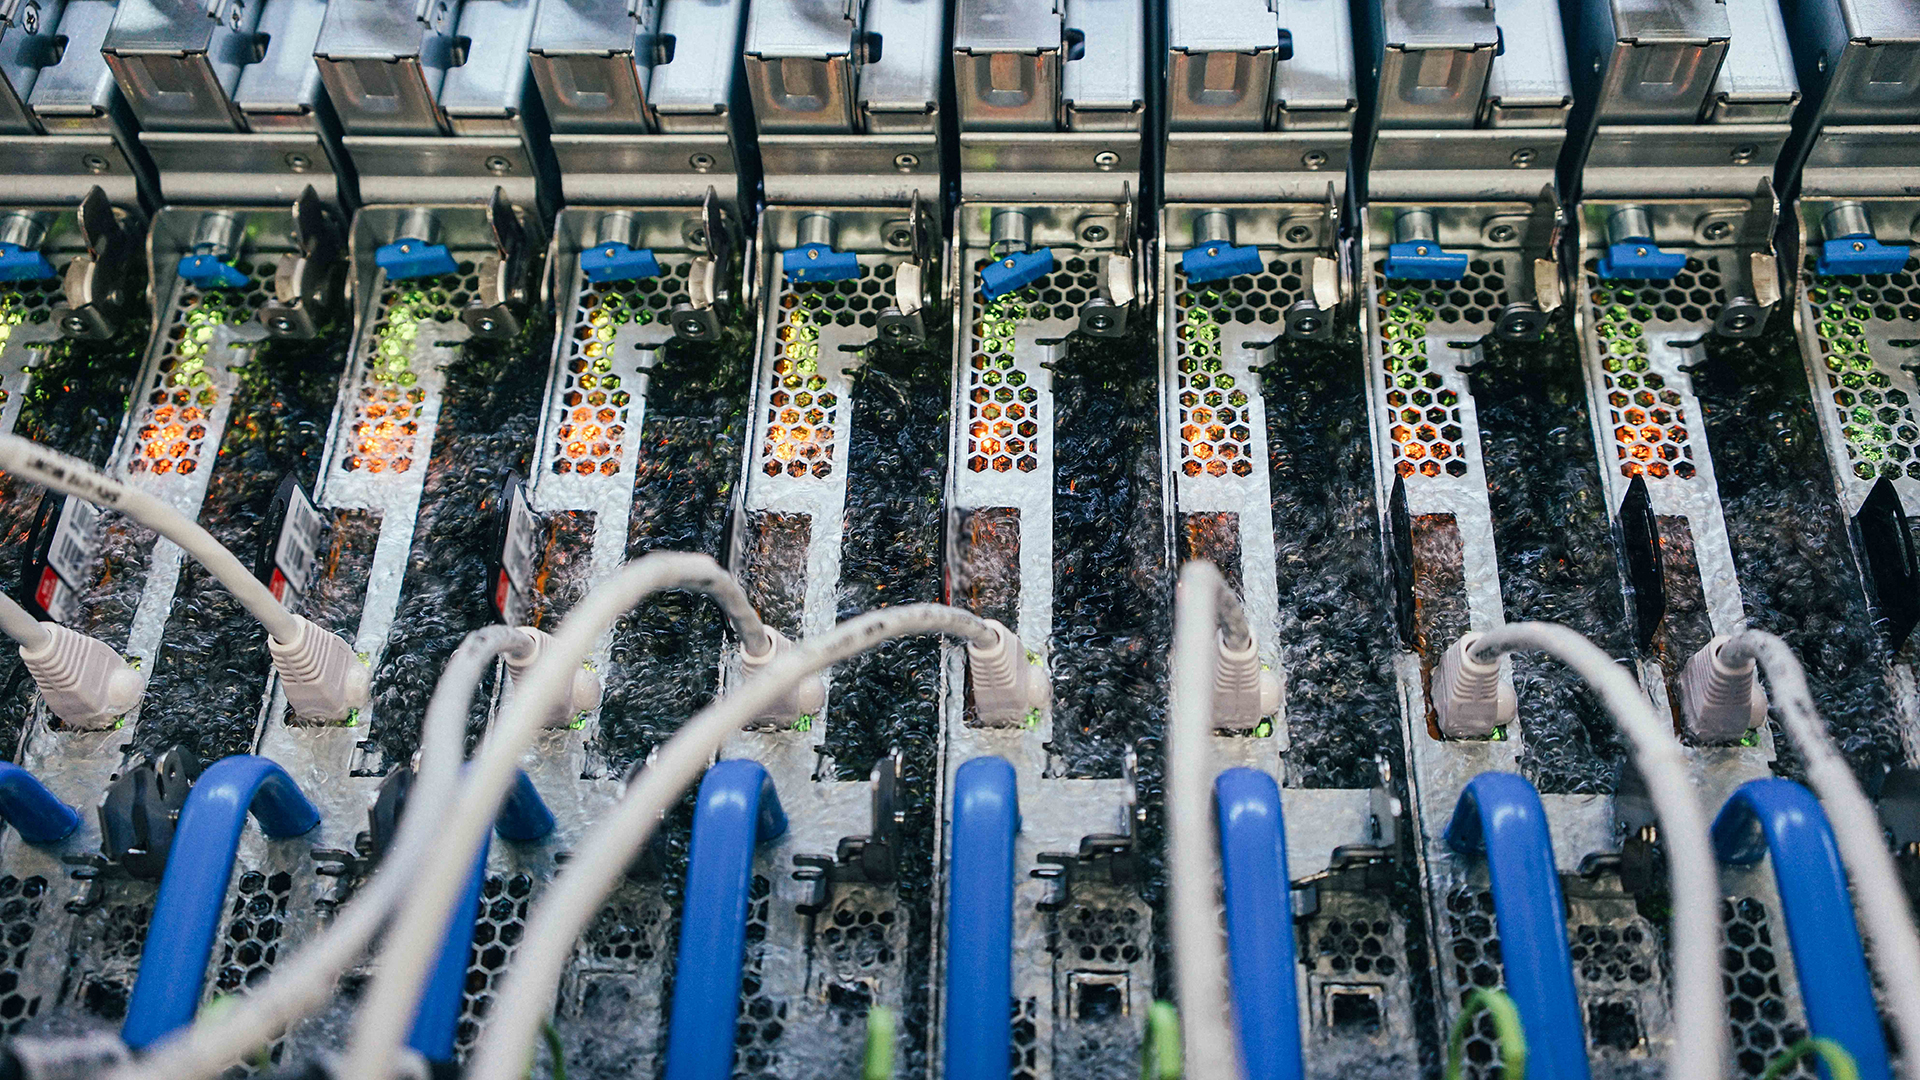 To cool datacenter servers, Microsoft turns to boiling liquid